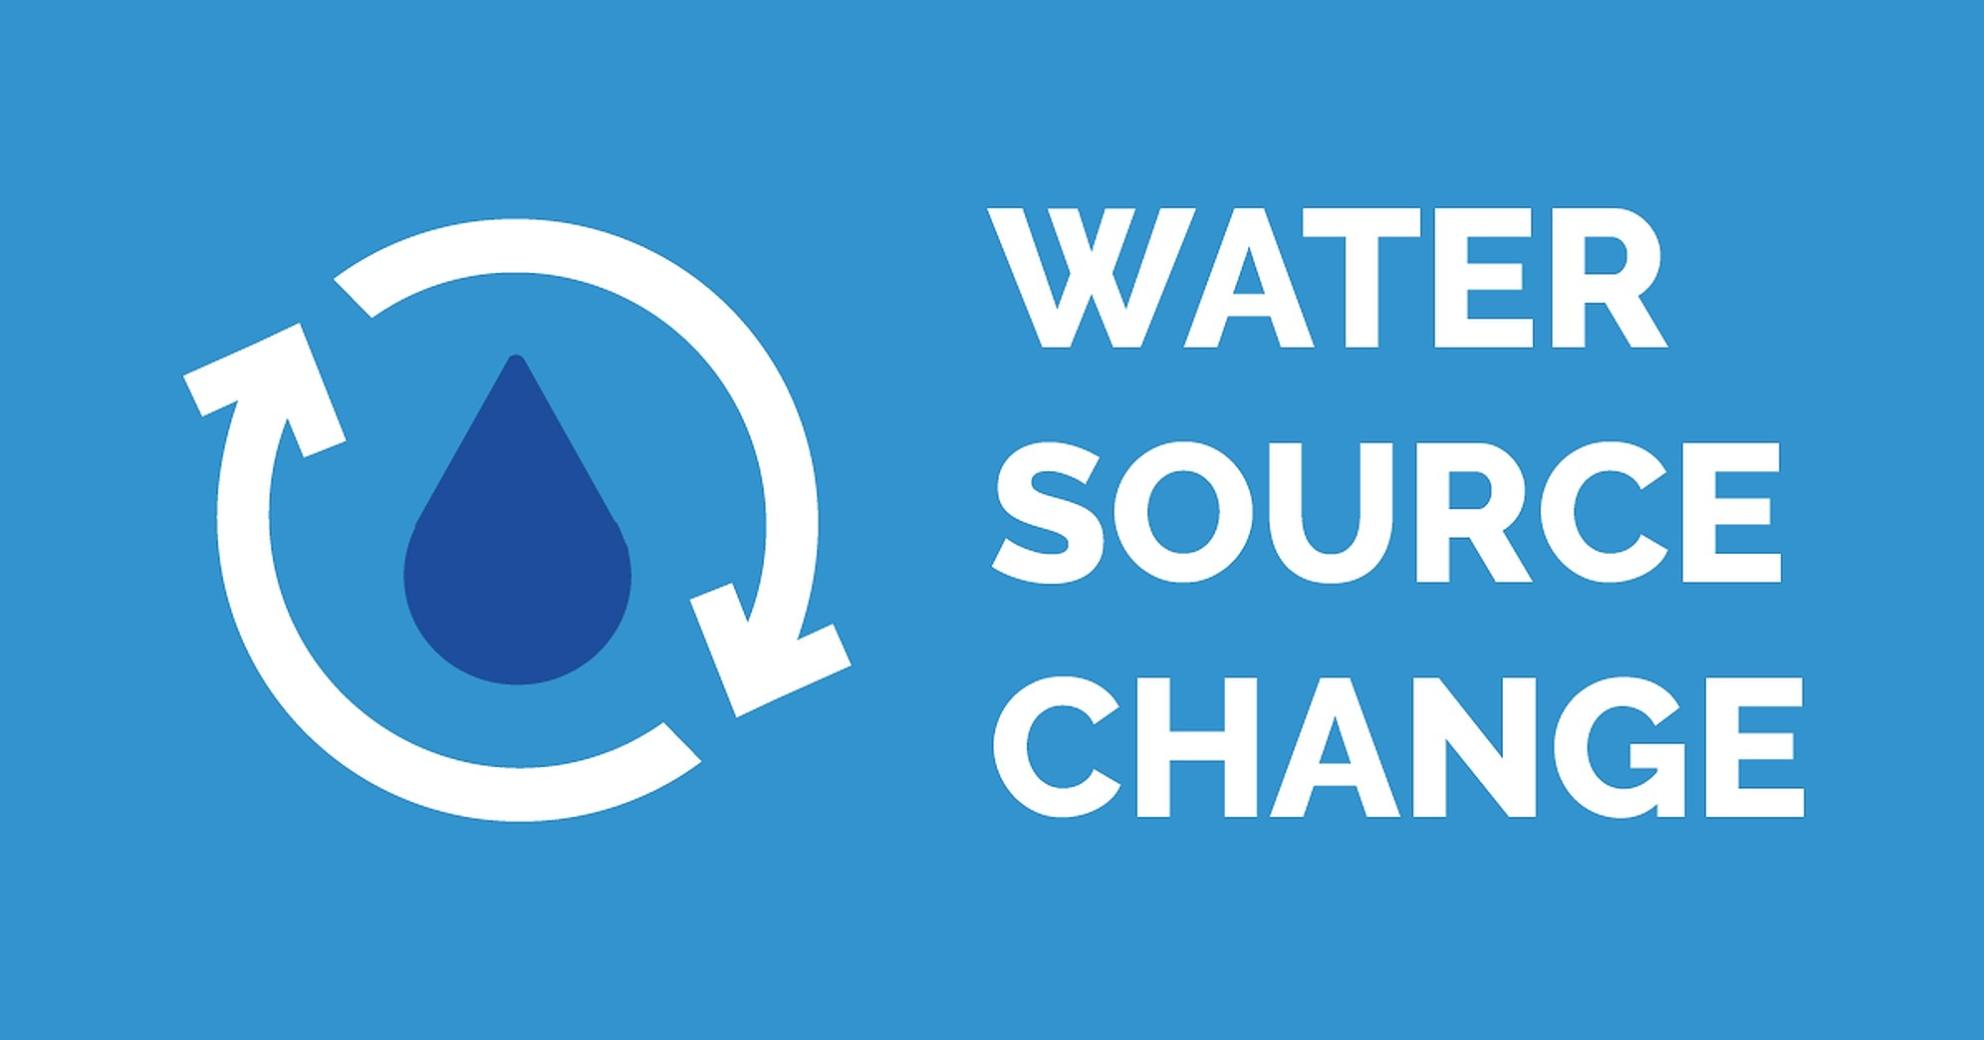 Water Source Change graphic